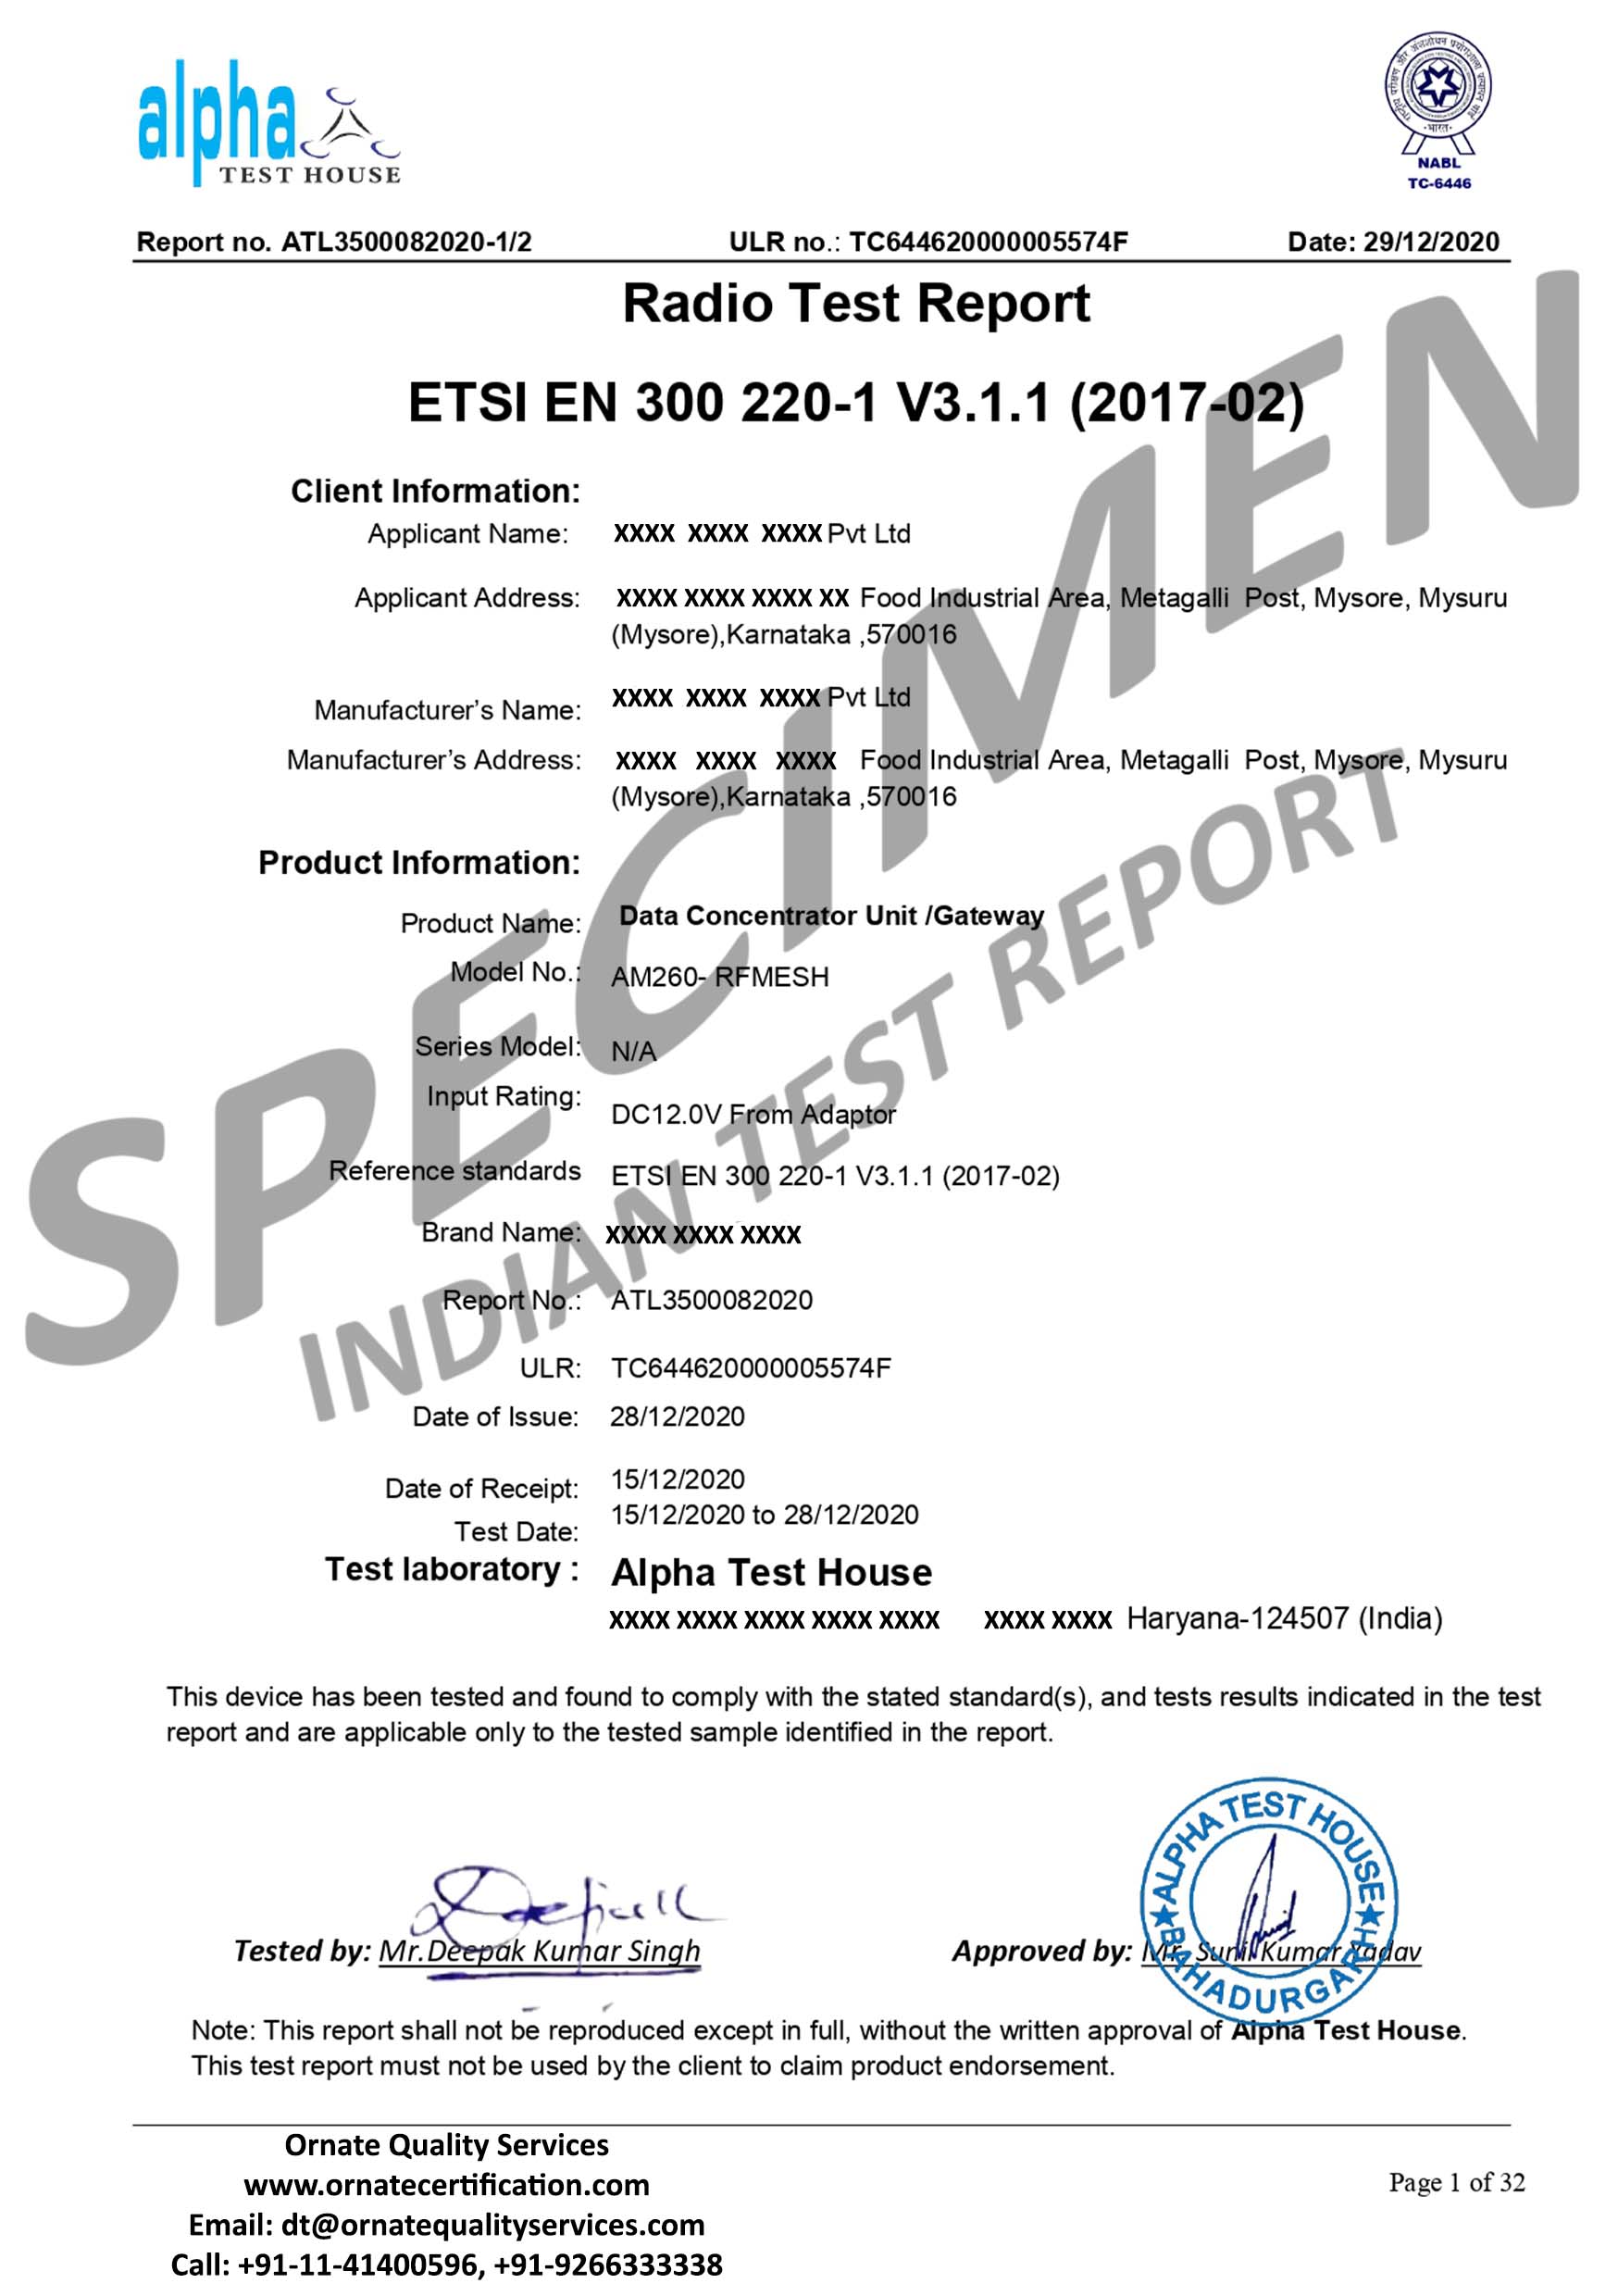 images/sample-indian-radio-frequency-rf-test-report-wpc-approval-1